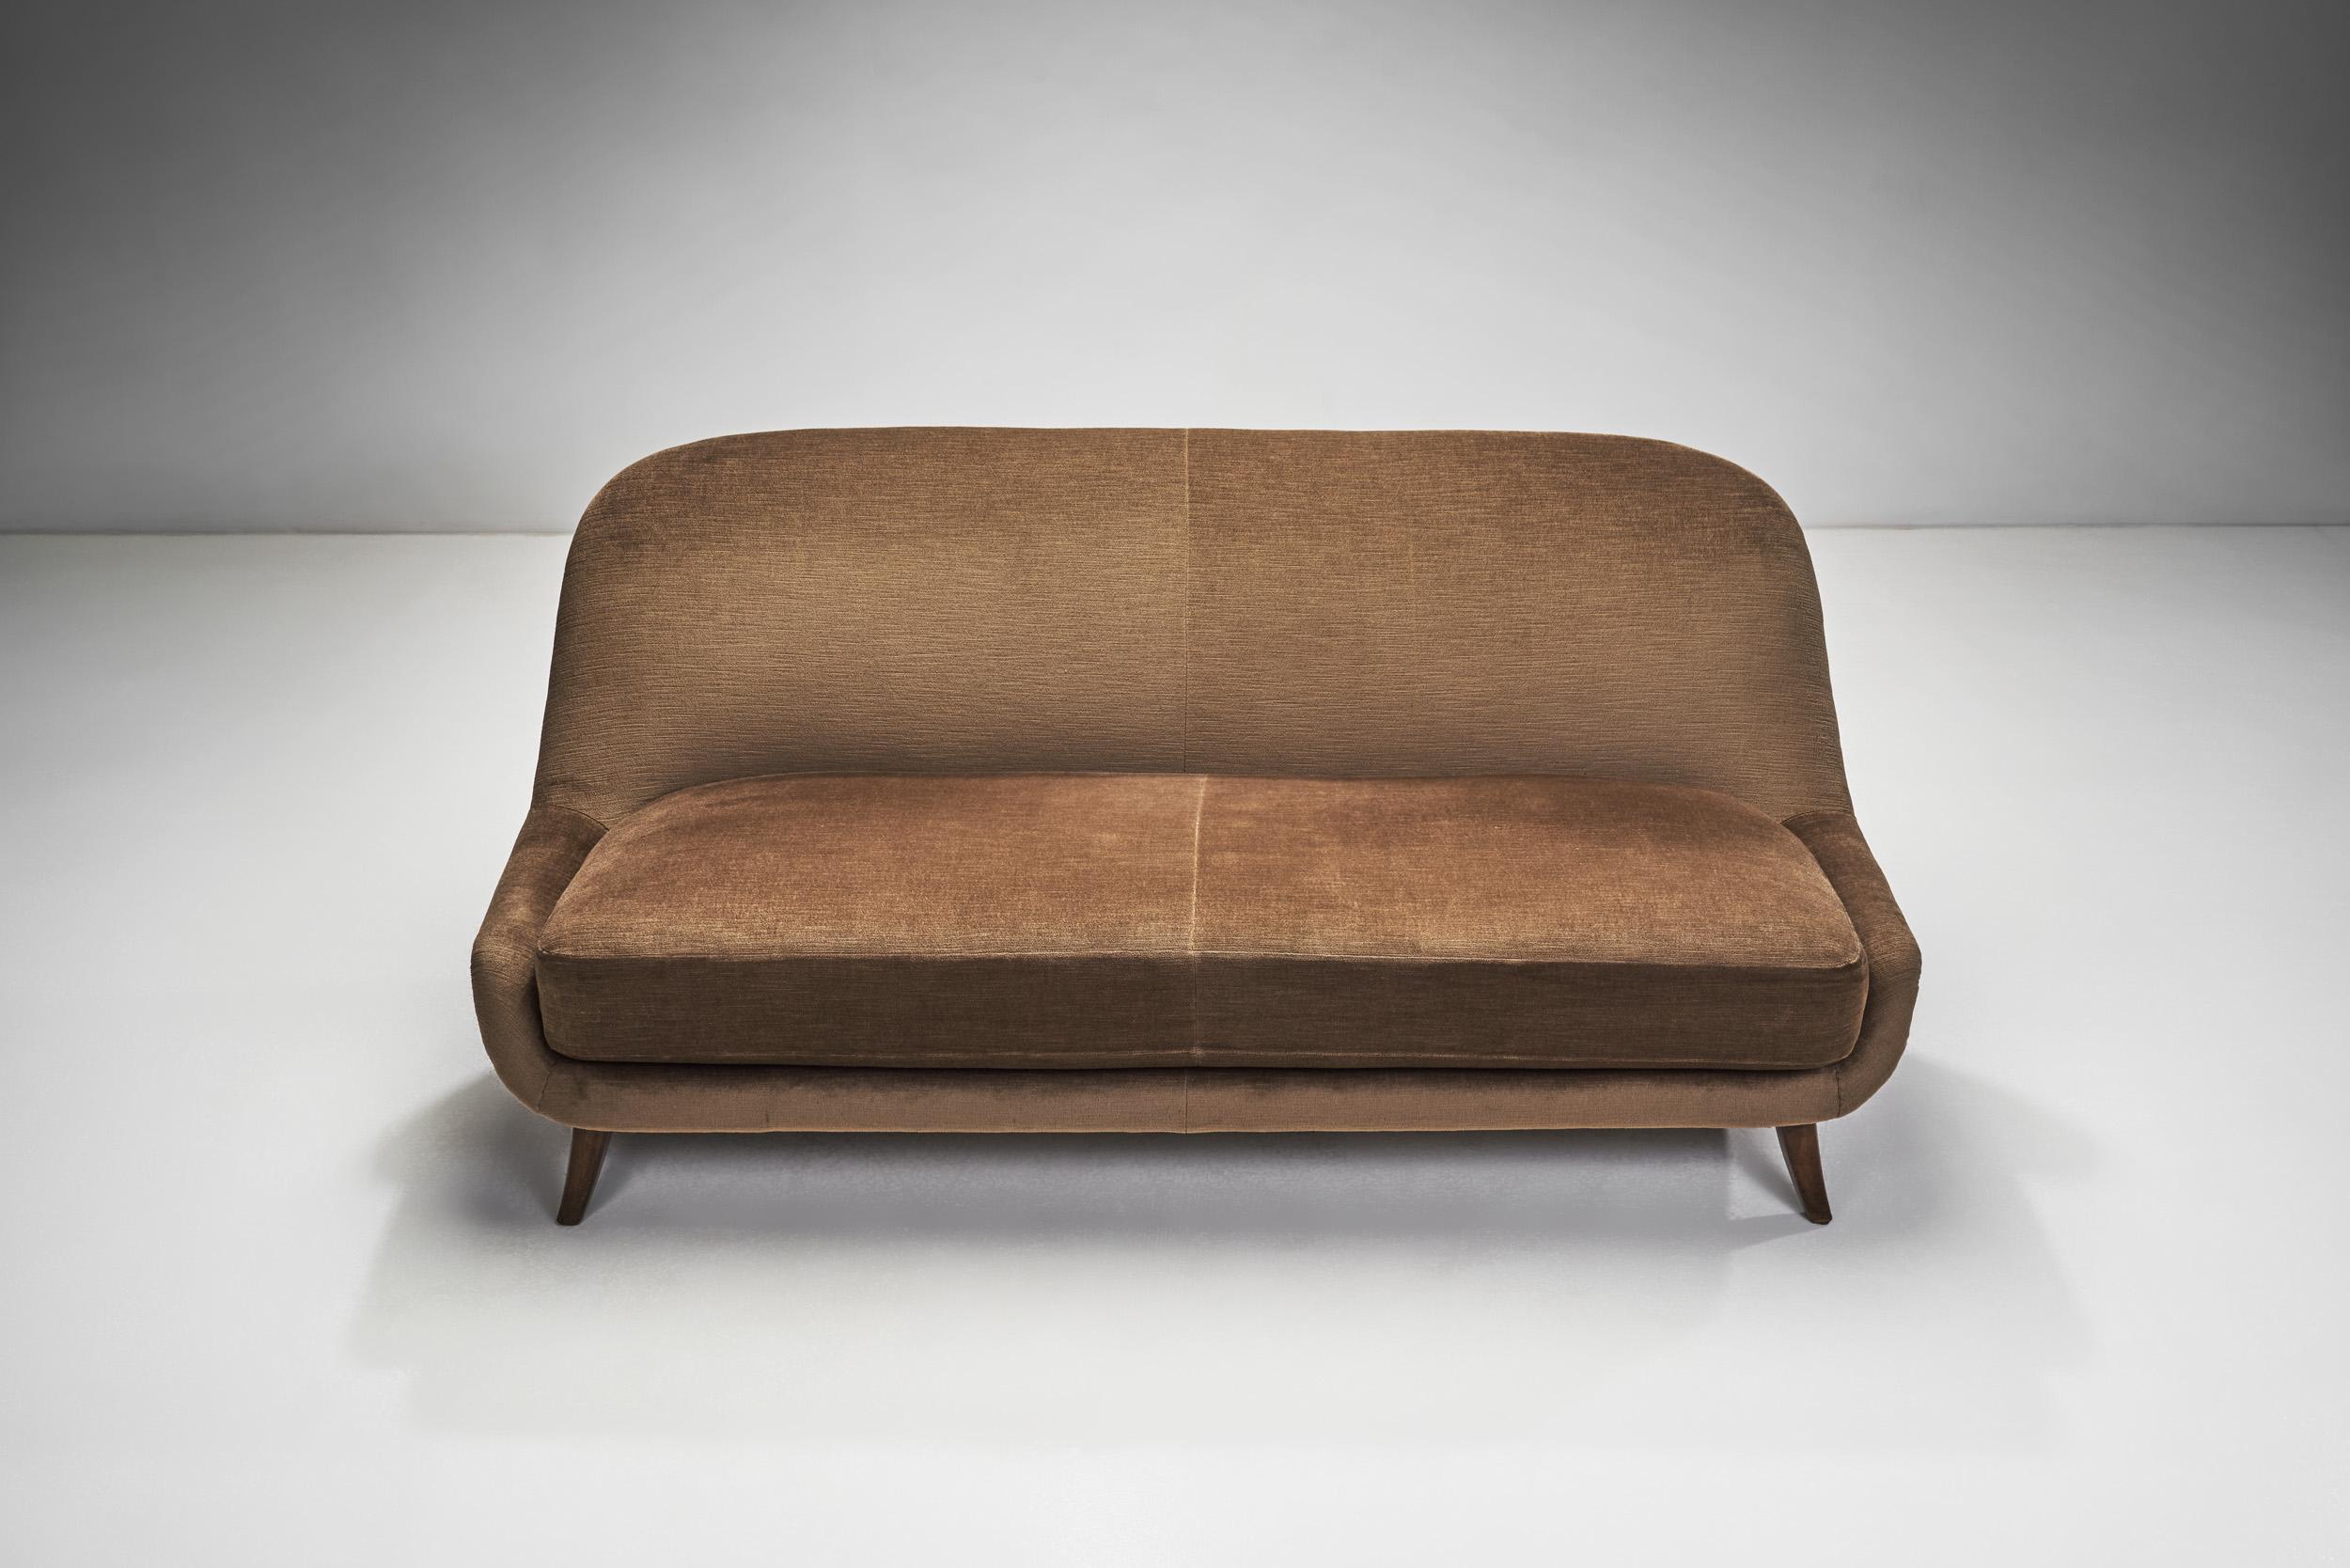 Velour Two-Seater Sofa with Solid Wood Legs, Europe ca 1950s In Good Condition For Sale In Utrecht, NL